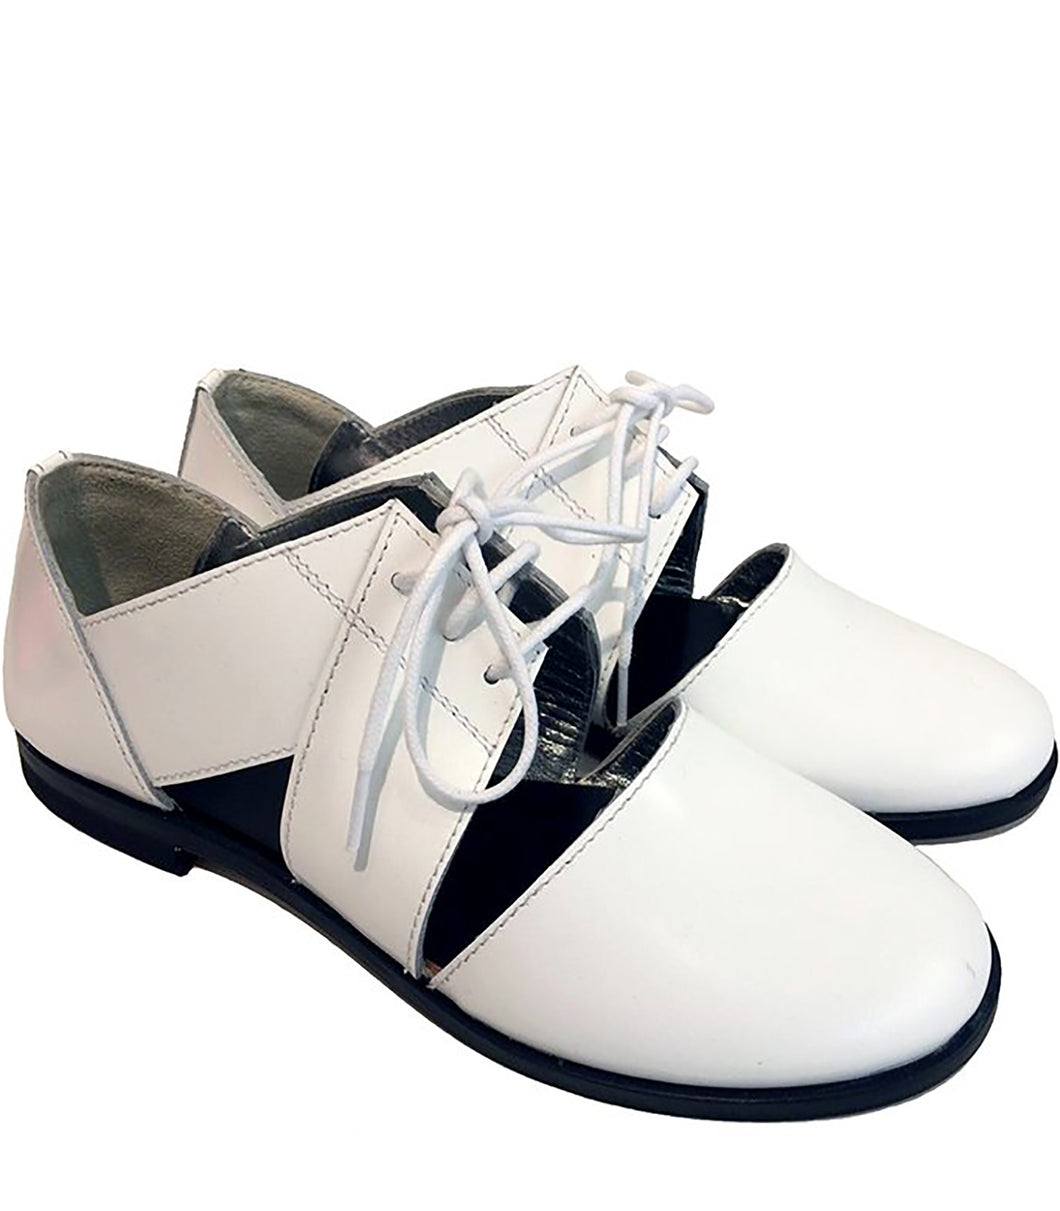 Holed Derby in White Calf Leather